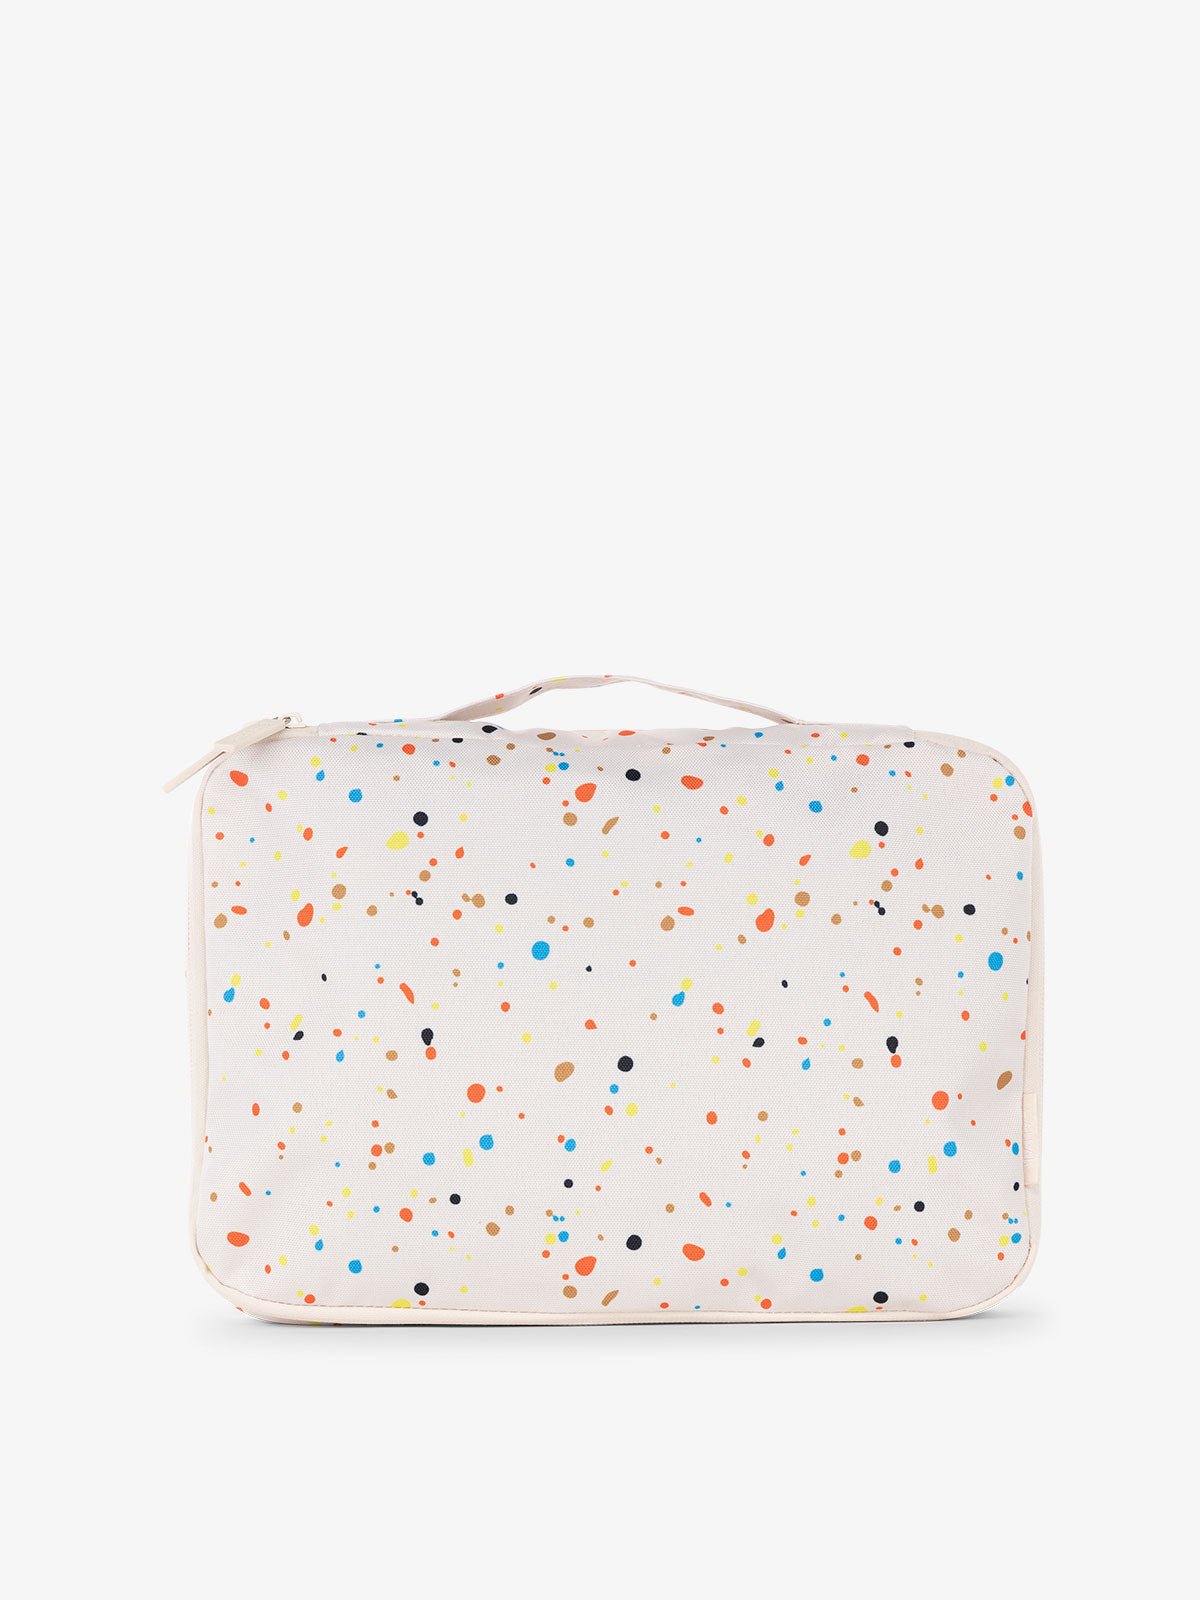 CALPAK packing cubes with top handle in beige speckle print